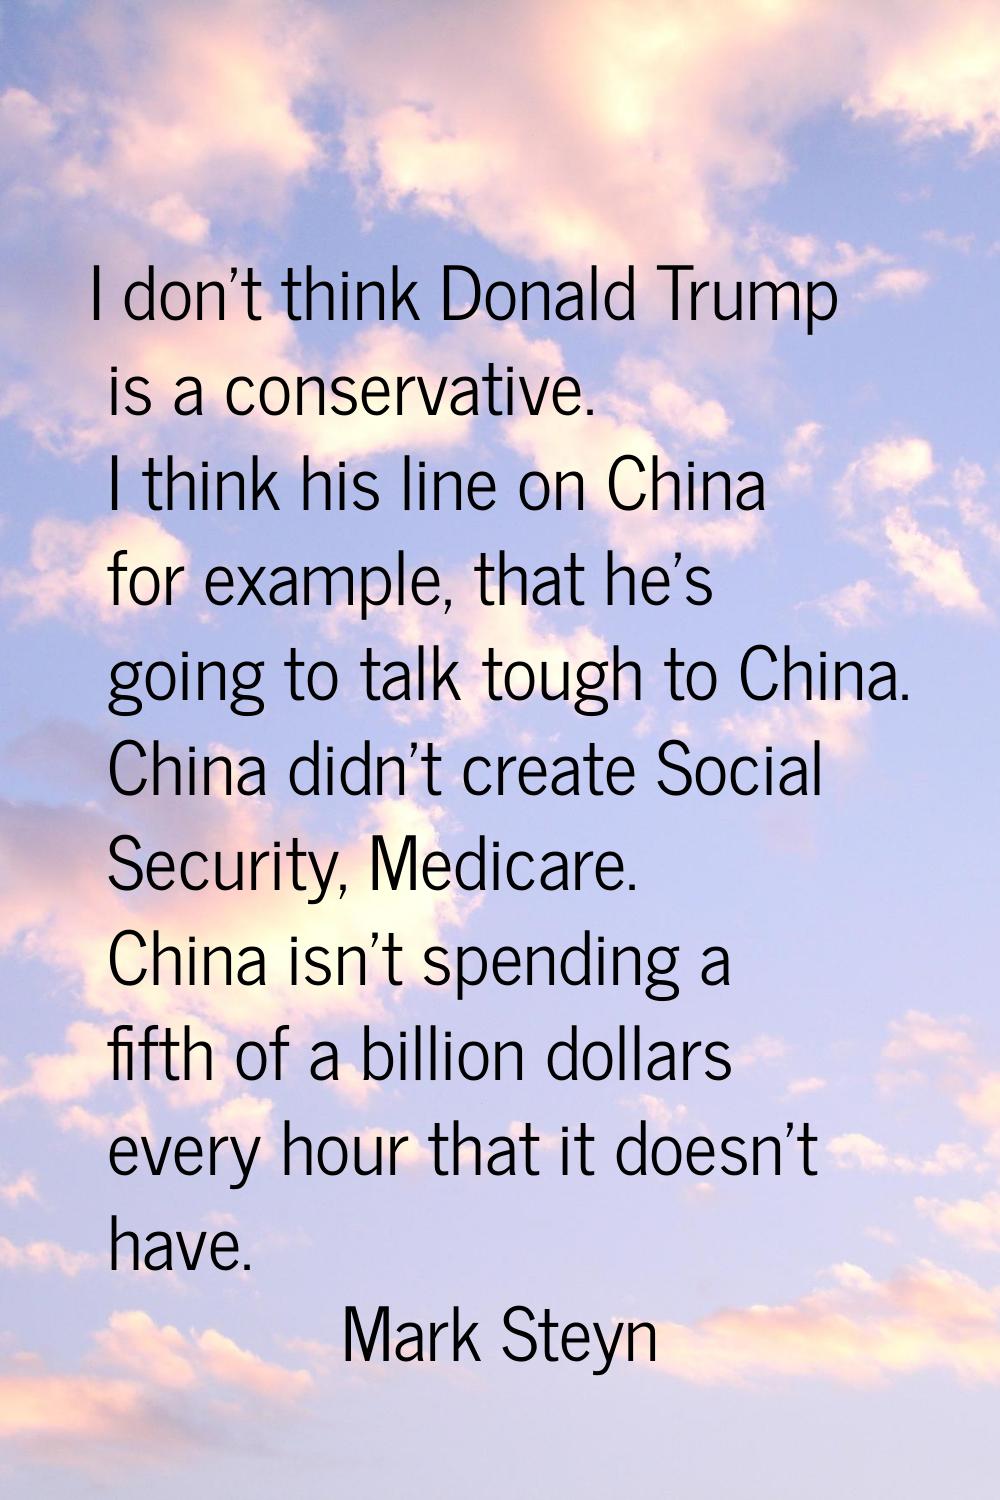 I don't think Donald Trump is a conservative. I think his line on China for example, that he's goin